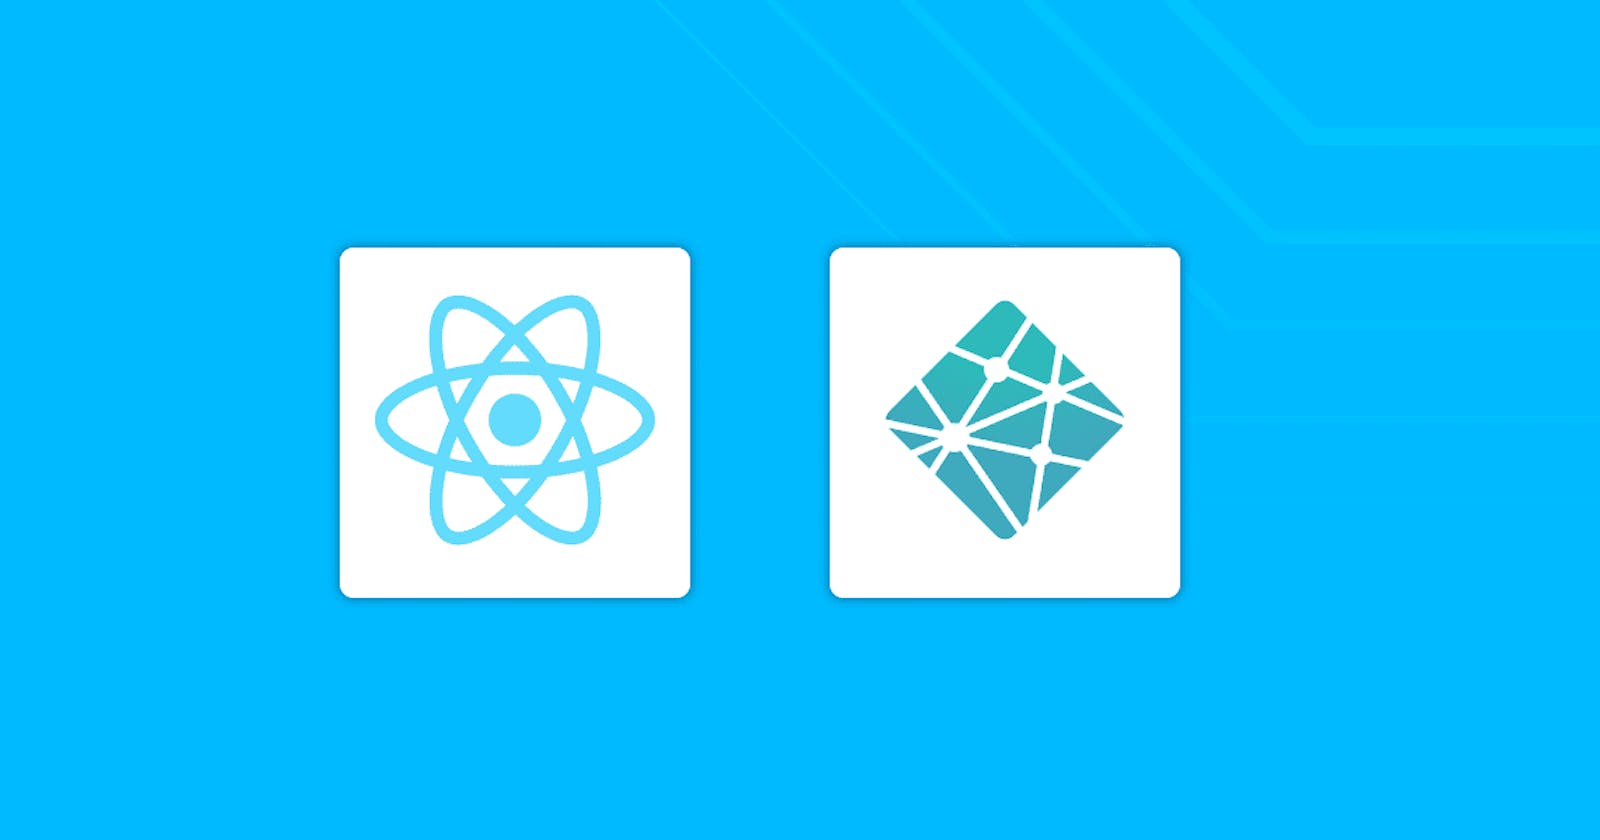 Creating a CI/CD environment for React applications using Netlify